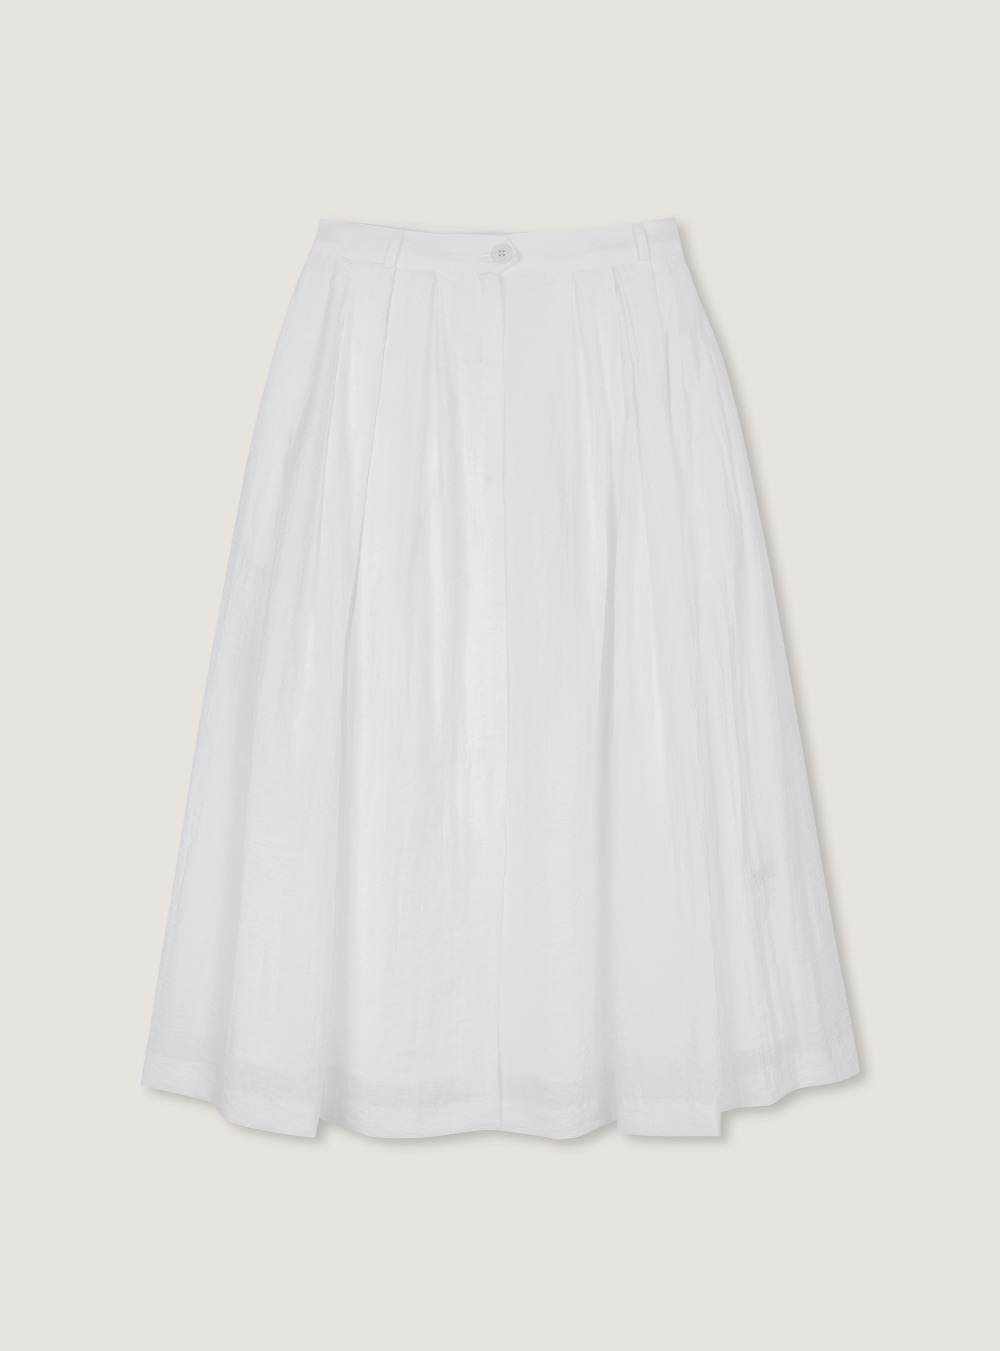 LILY SKIRT